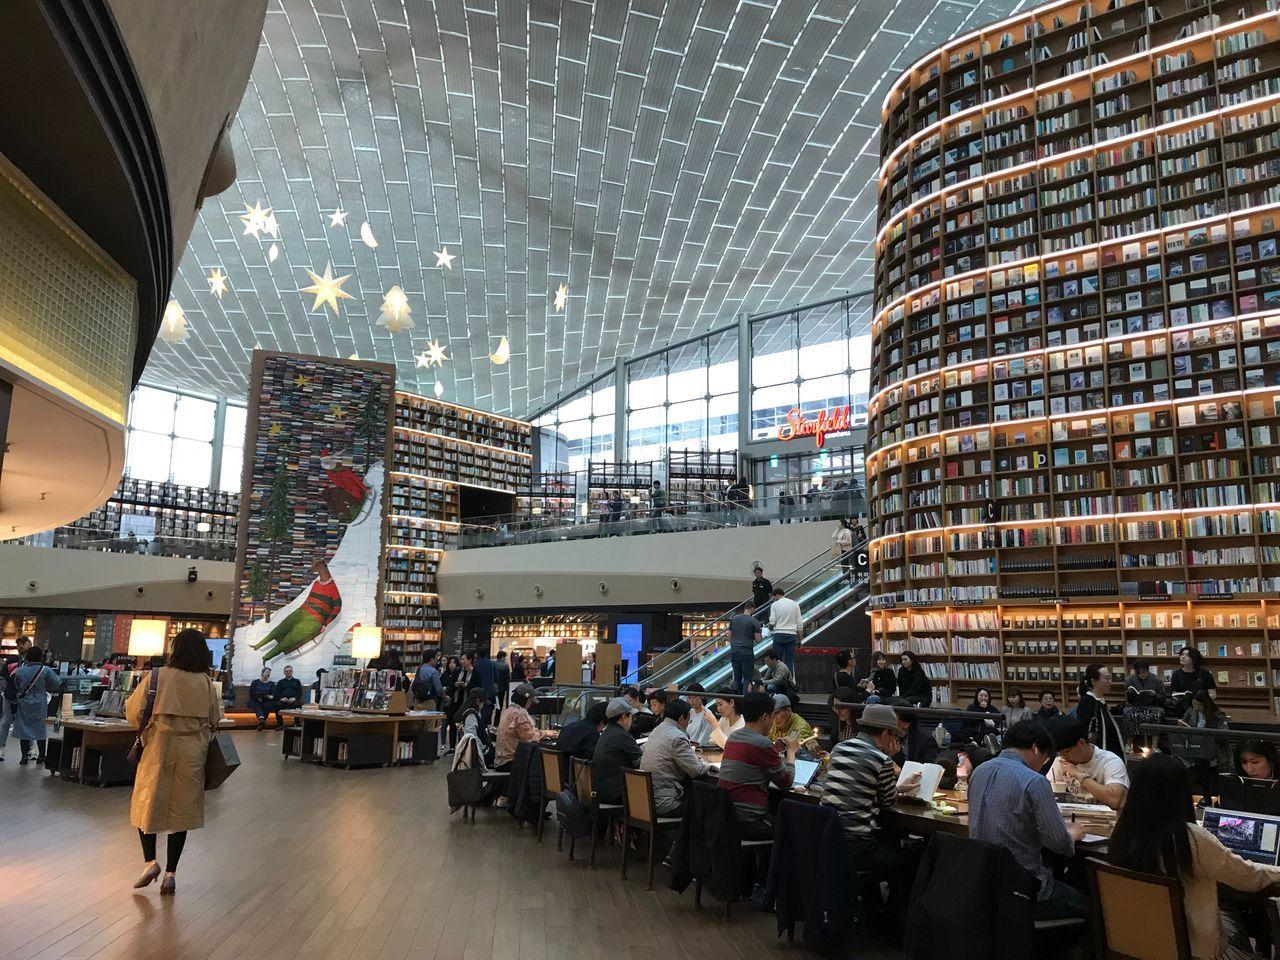 Seoul korea library, coex starfield, people sitting and reading inside